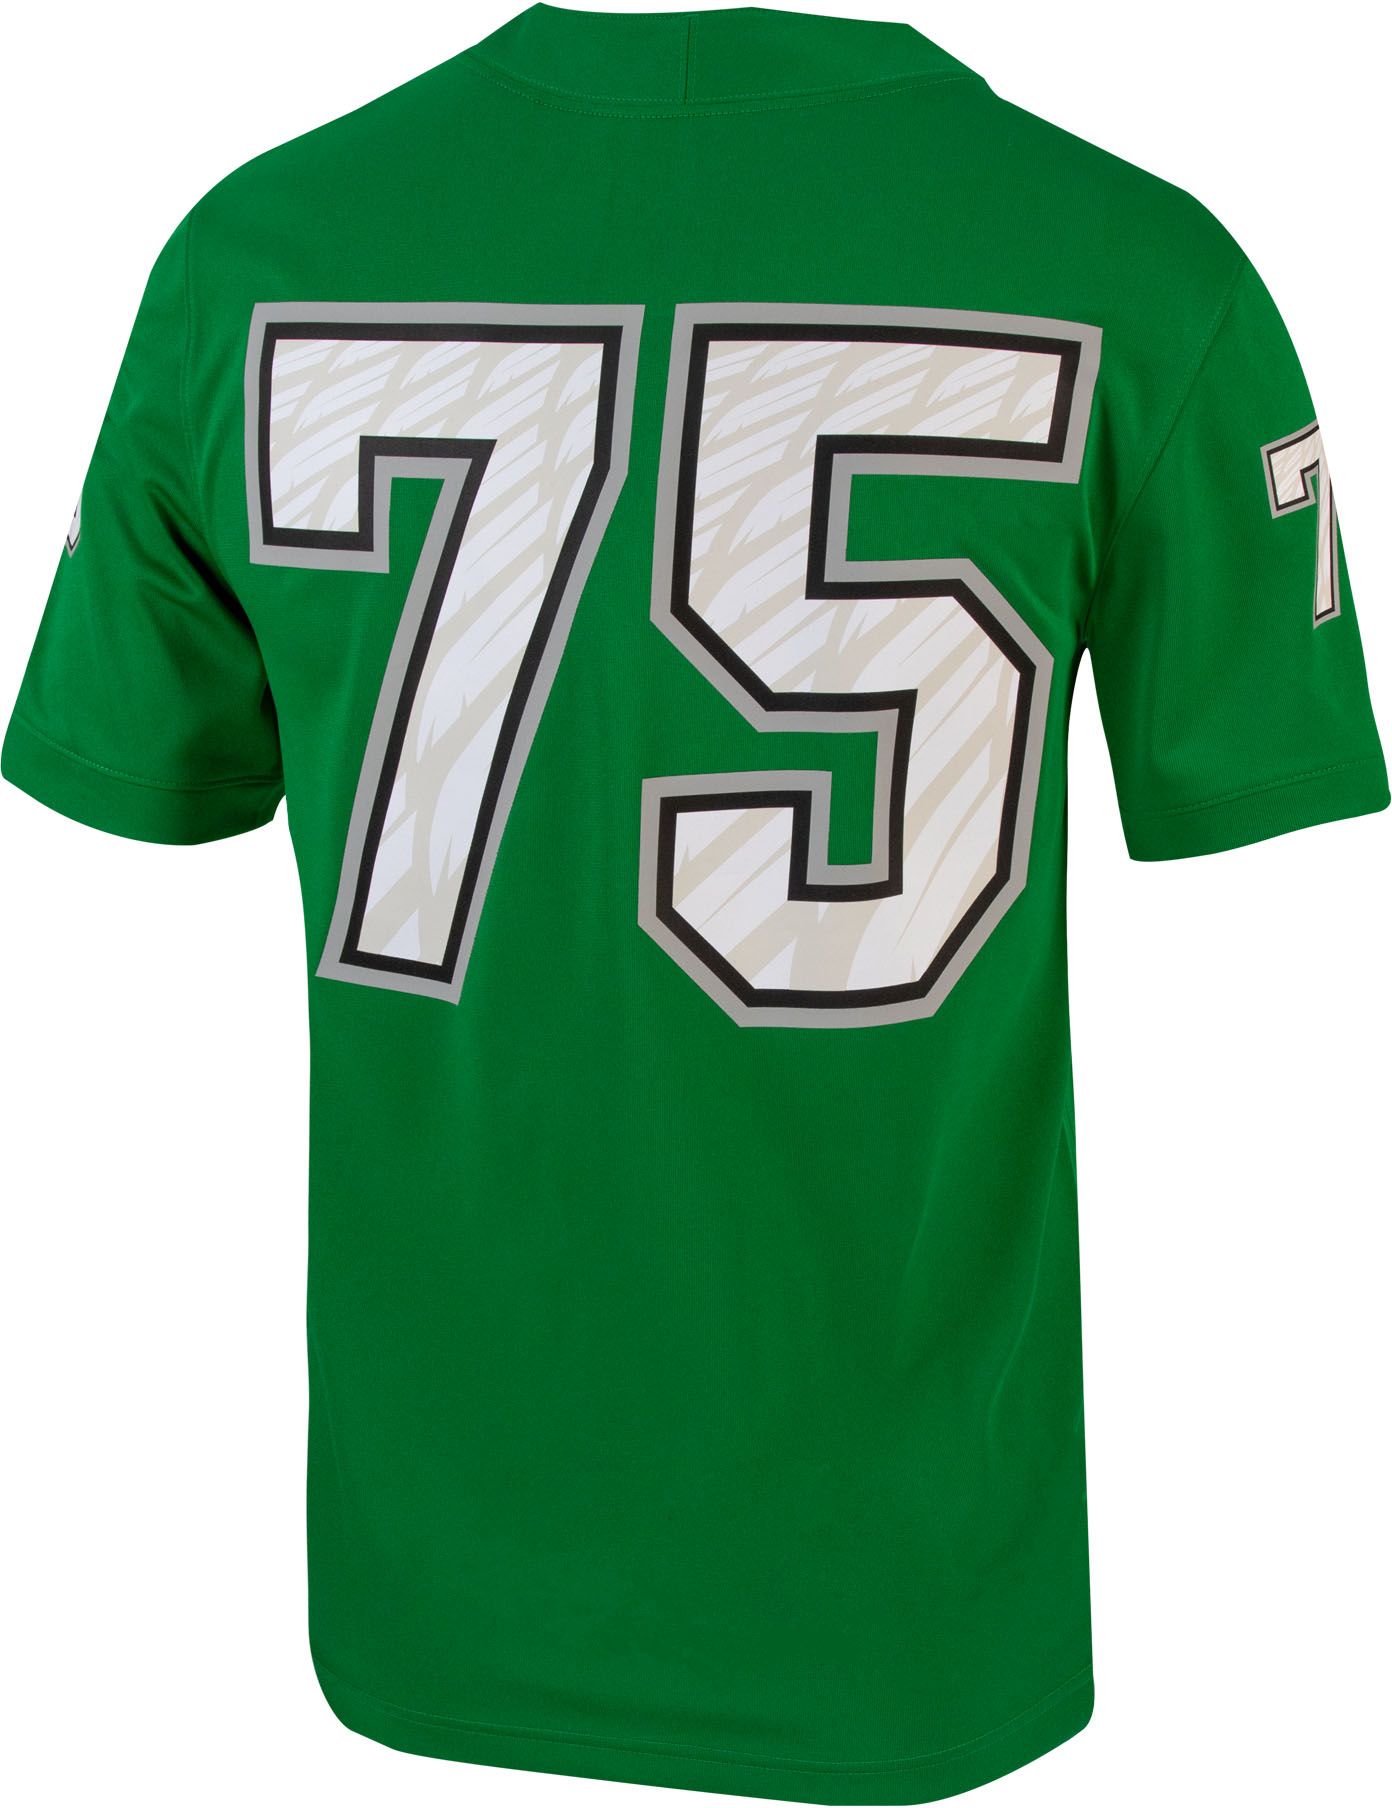 Mean Green C-USA champions jersey